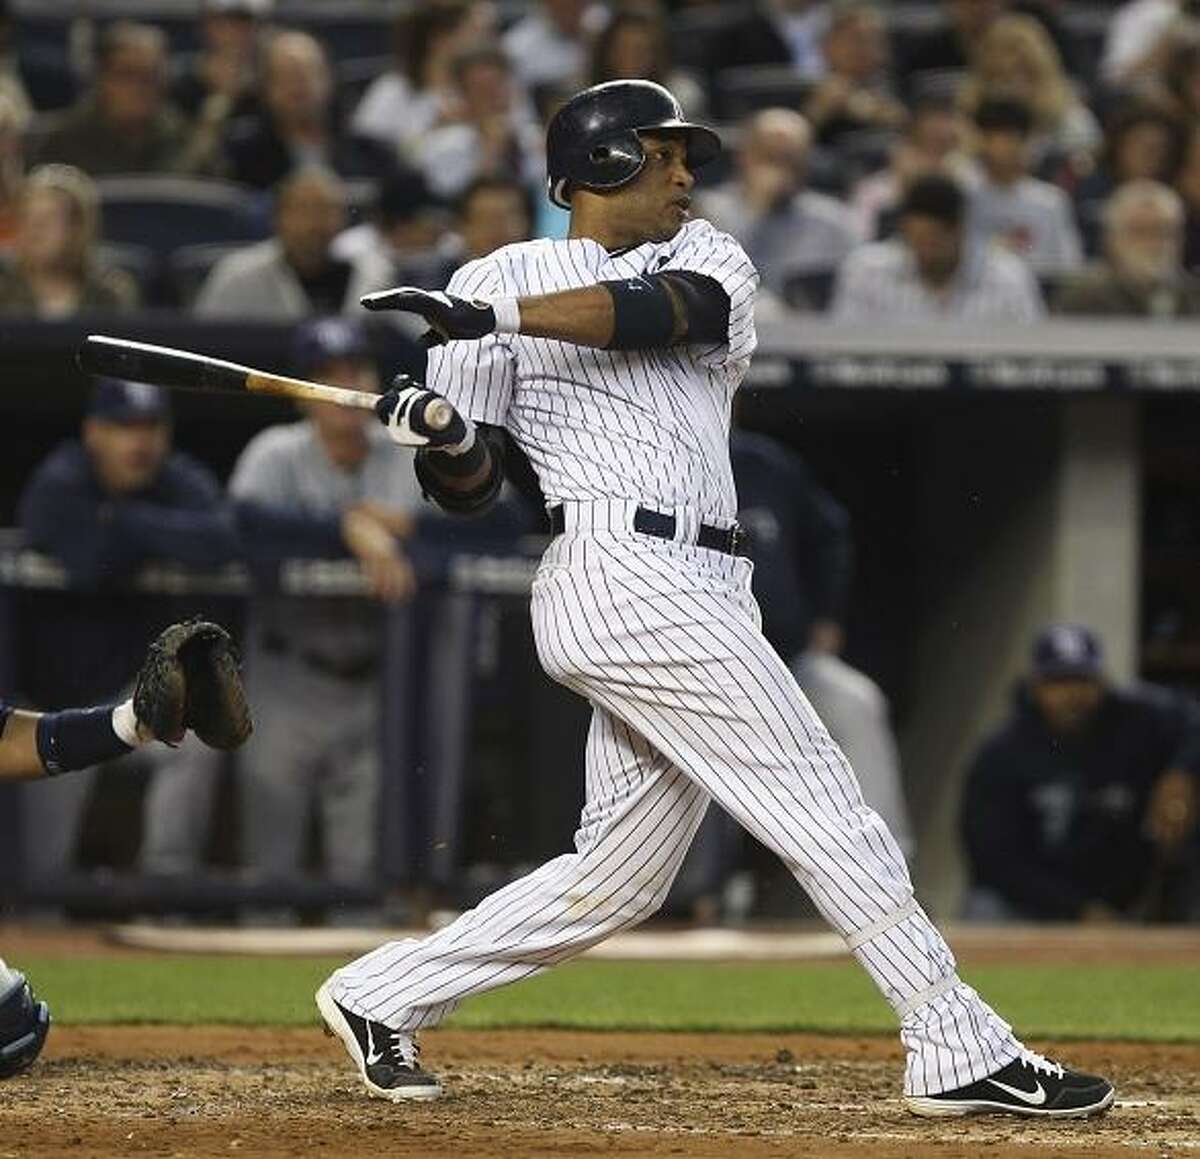 New York Yankees' Robinson Cano follows through on a solo home run during the fourth inning of a baseball game against the Tampa Bay Rays at Yankee Stadium in New York, Wednesday, June 6, 2012. (AP Photo/Seth Wenig)